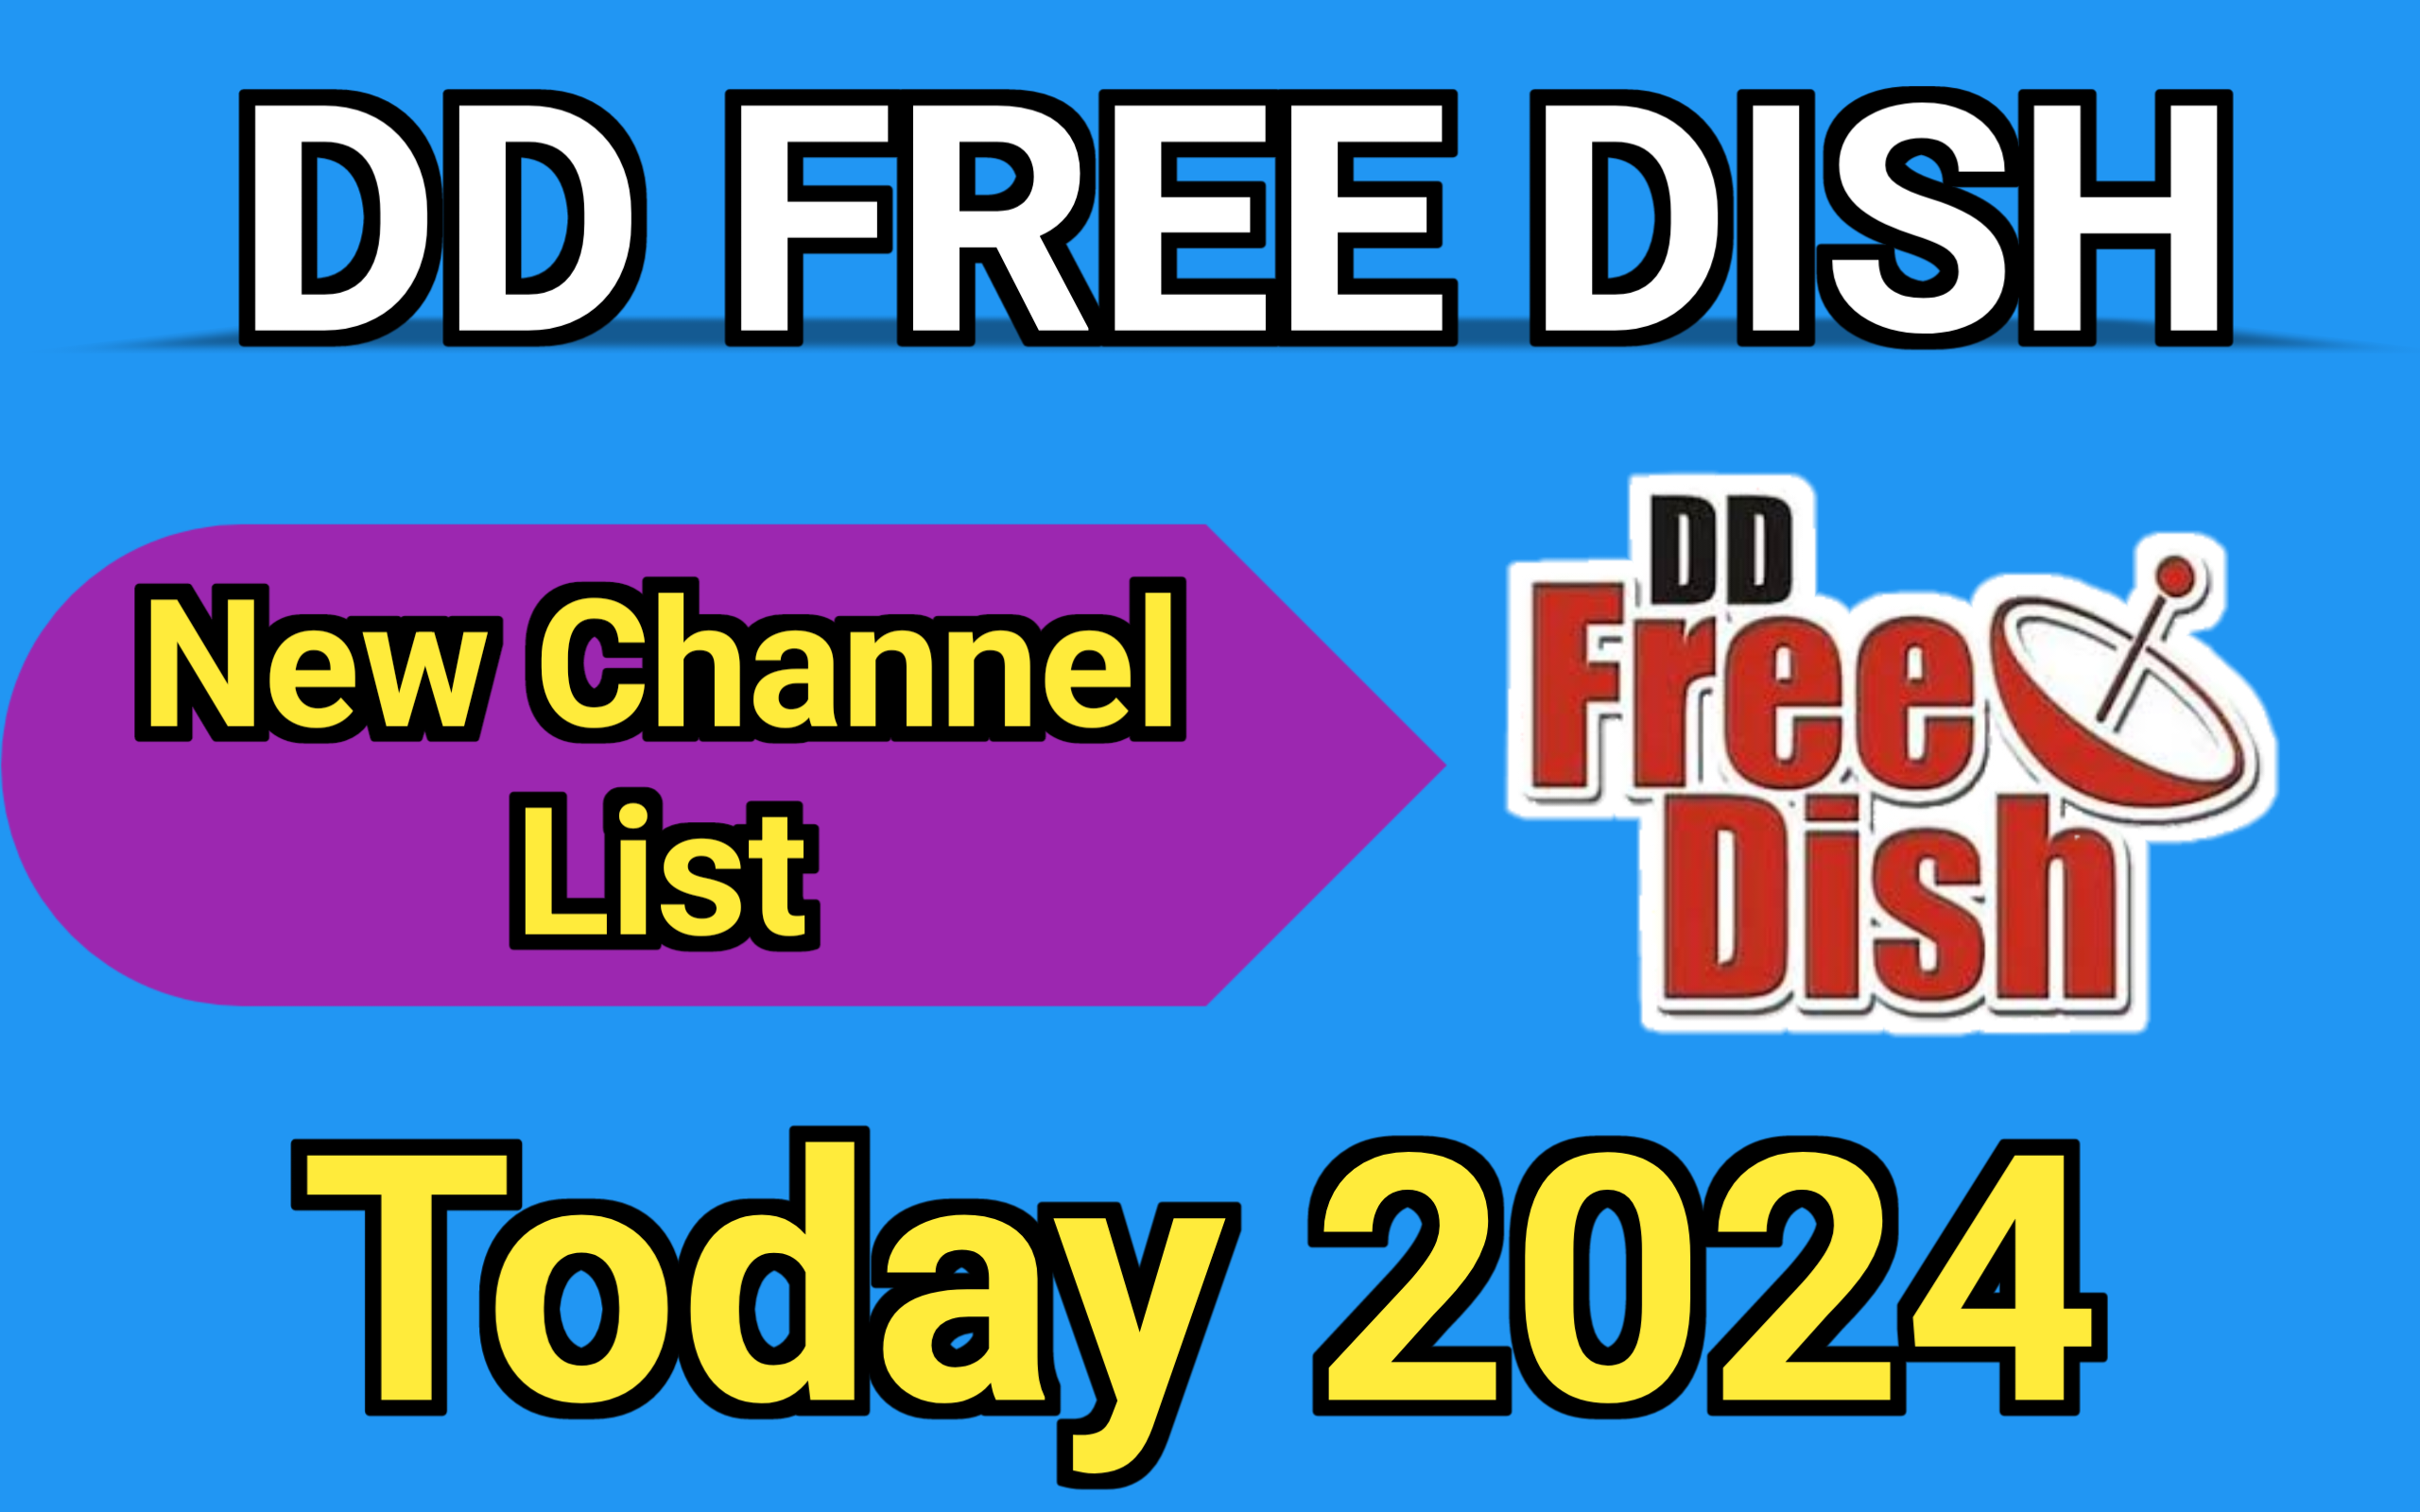 DD Free Dish New Channel List Today 2024